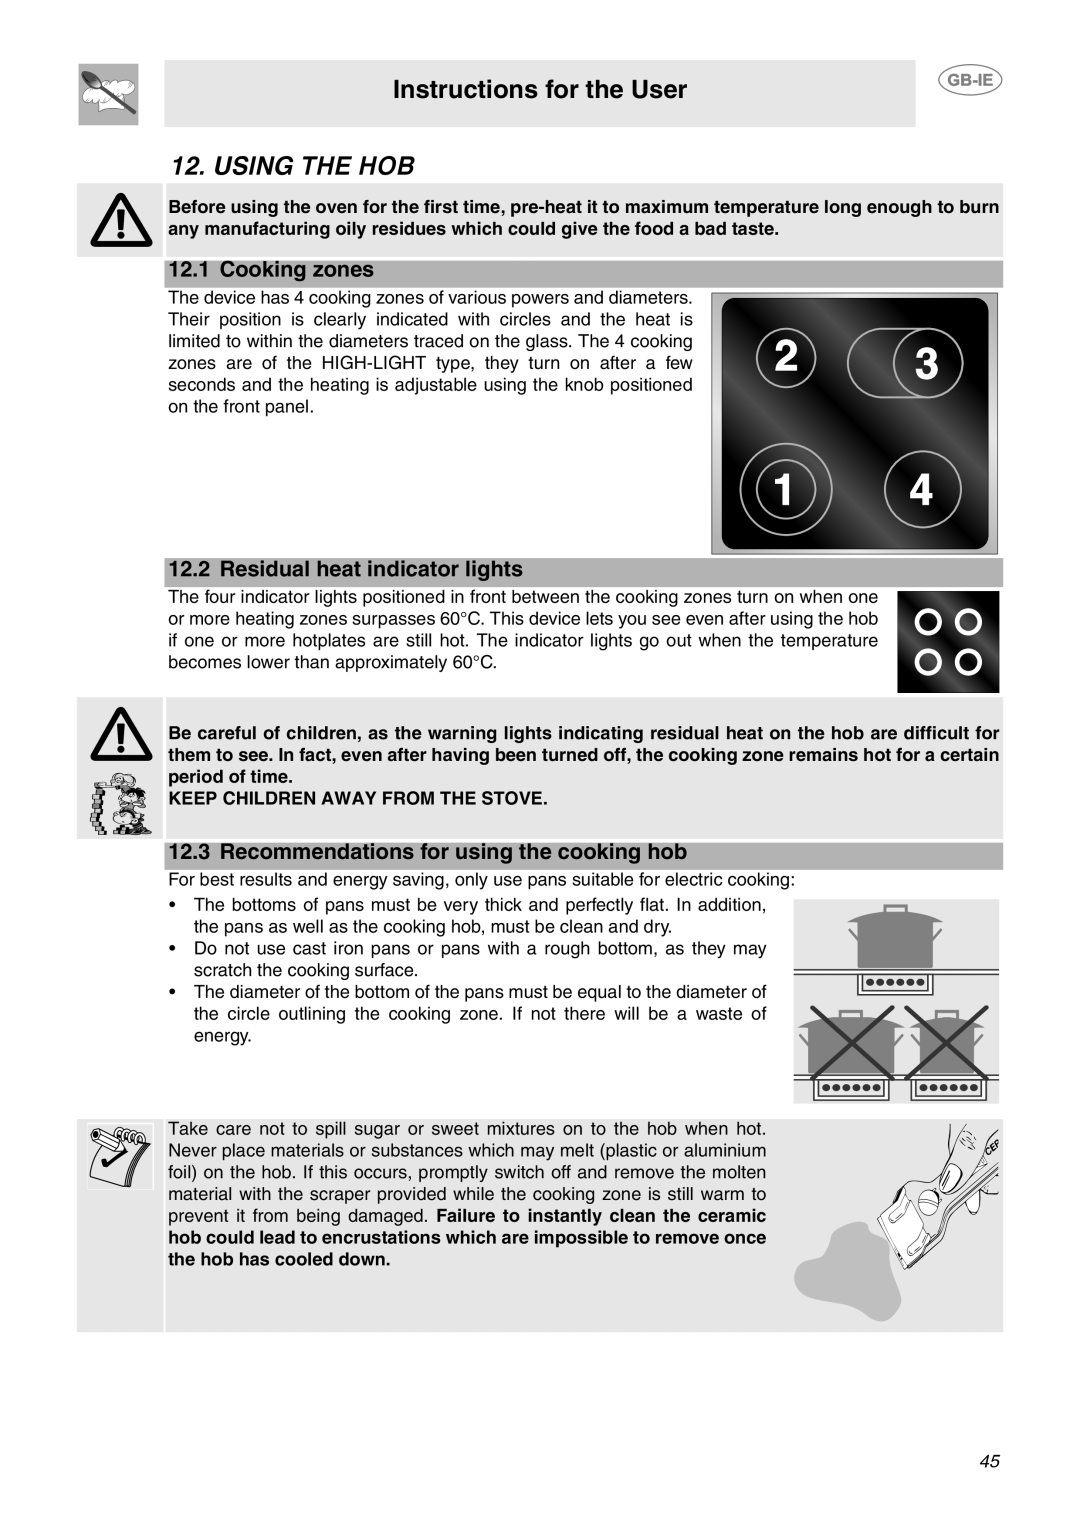 Smeg CE6CMX manual Using The Hob, Instructions for the User, Cooking zones, Residual heat indicator lights 